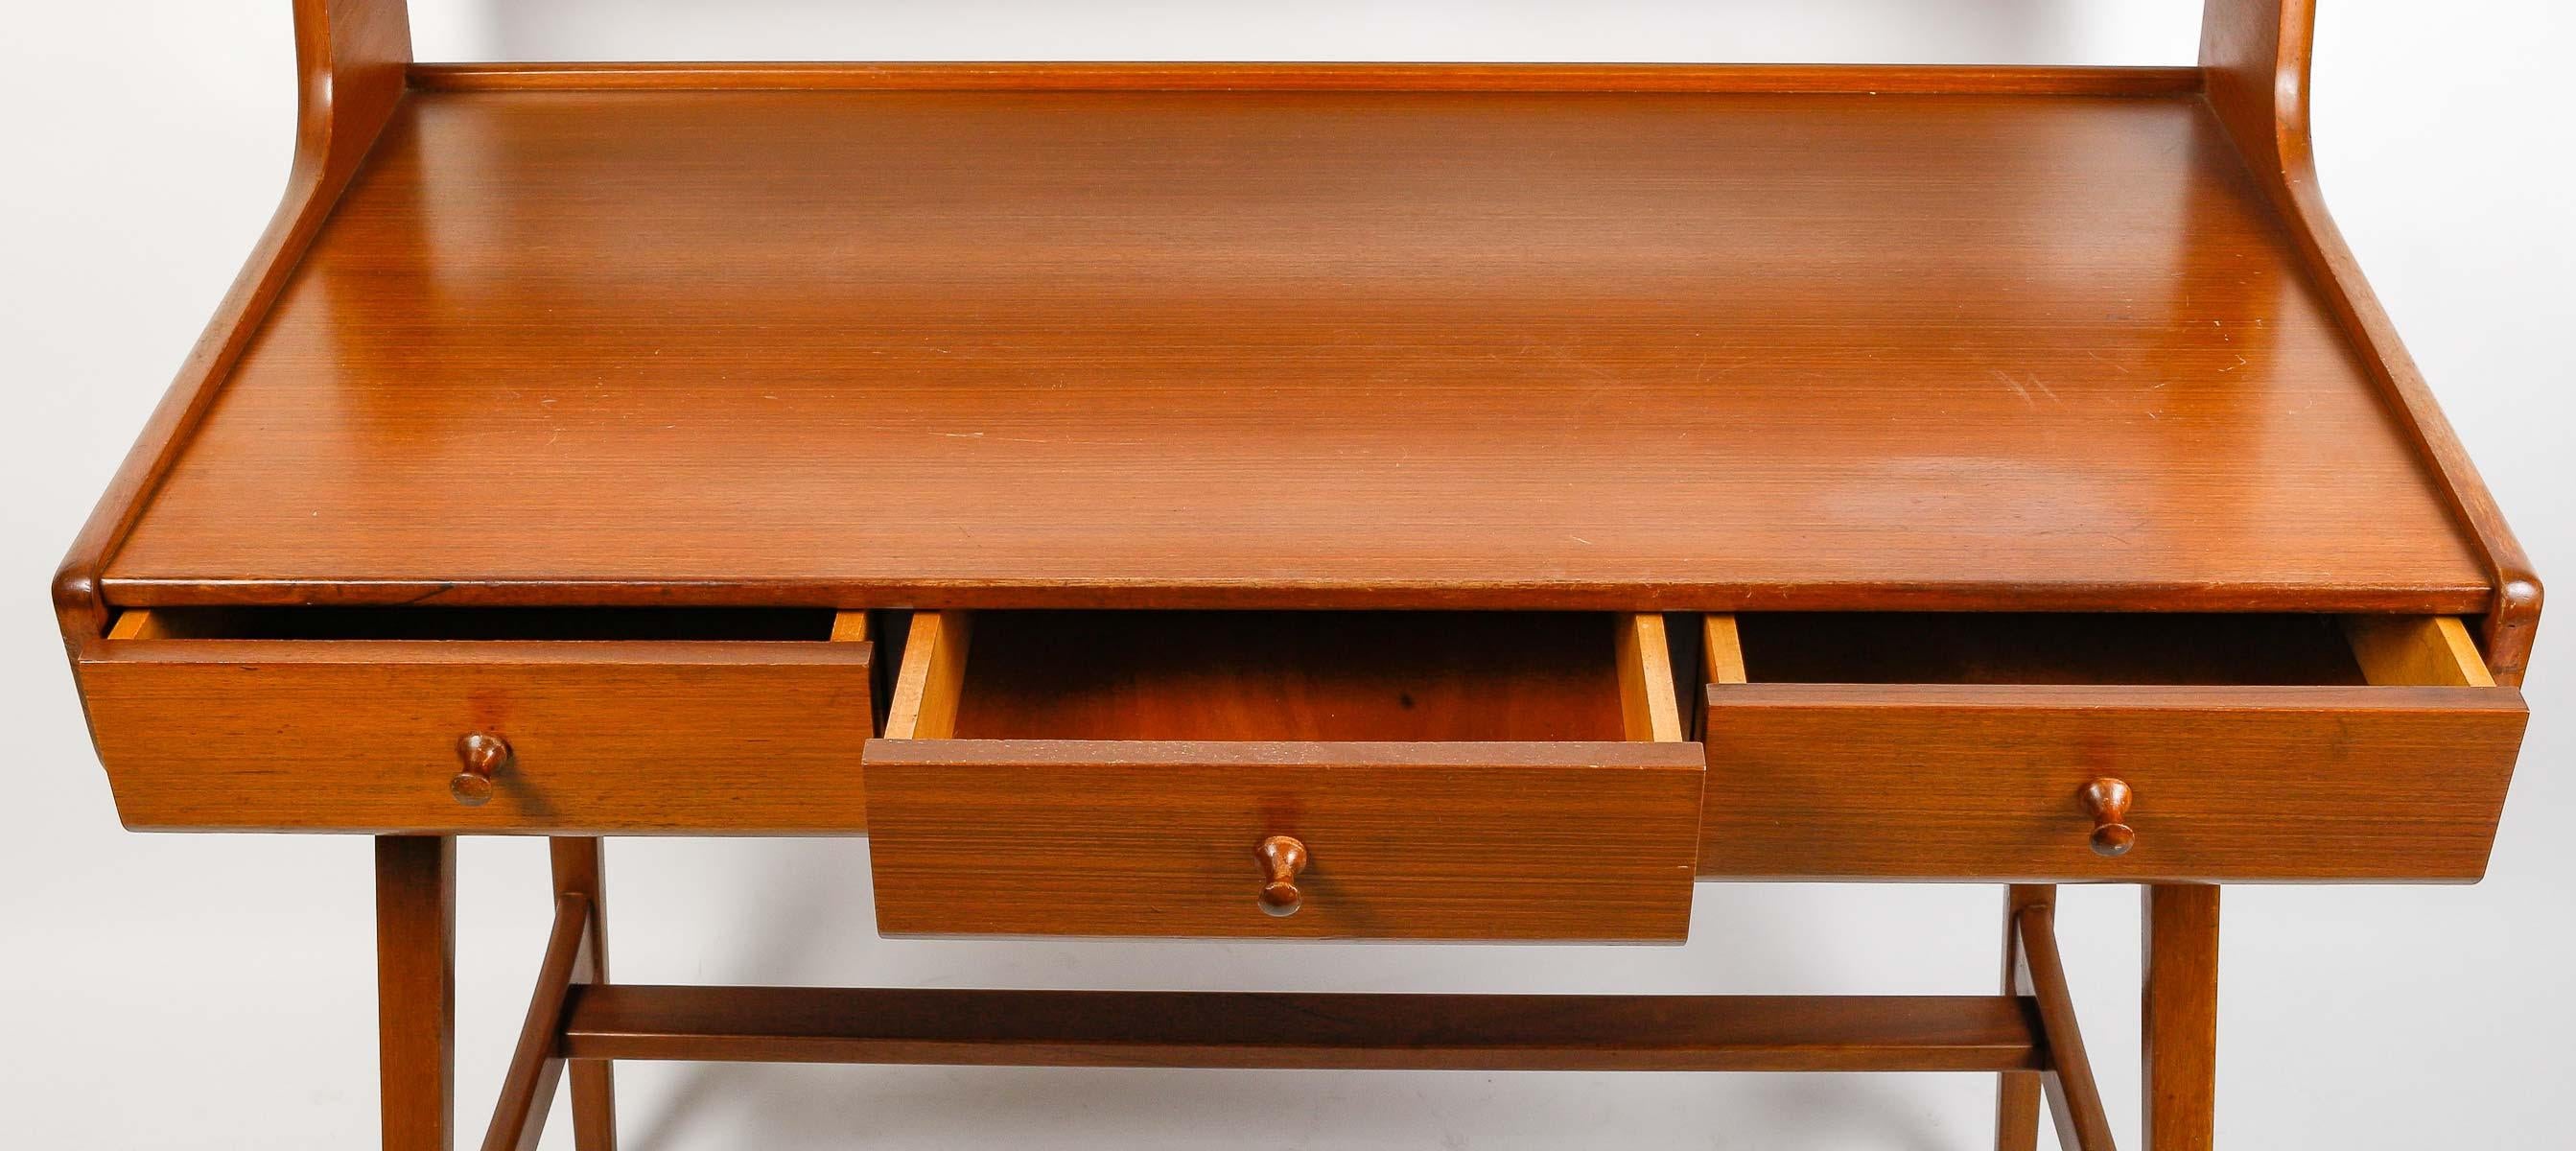 French Desk by Jacques Hauville, circa 1960.